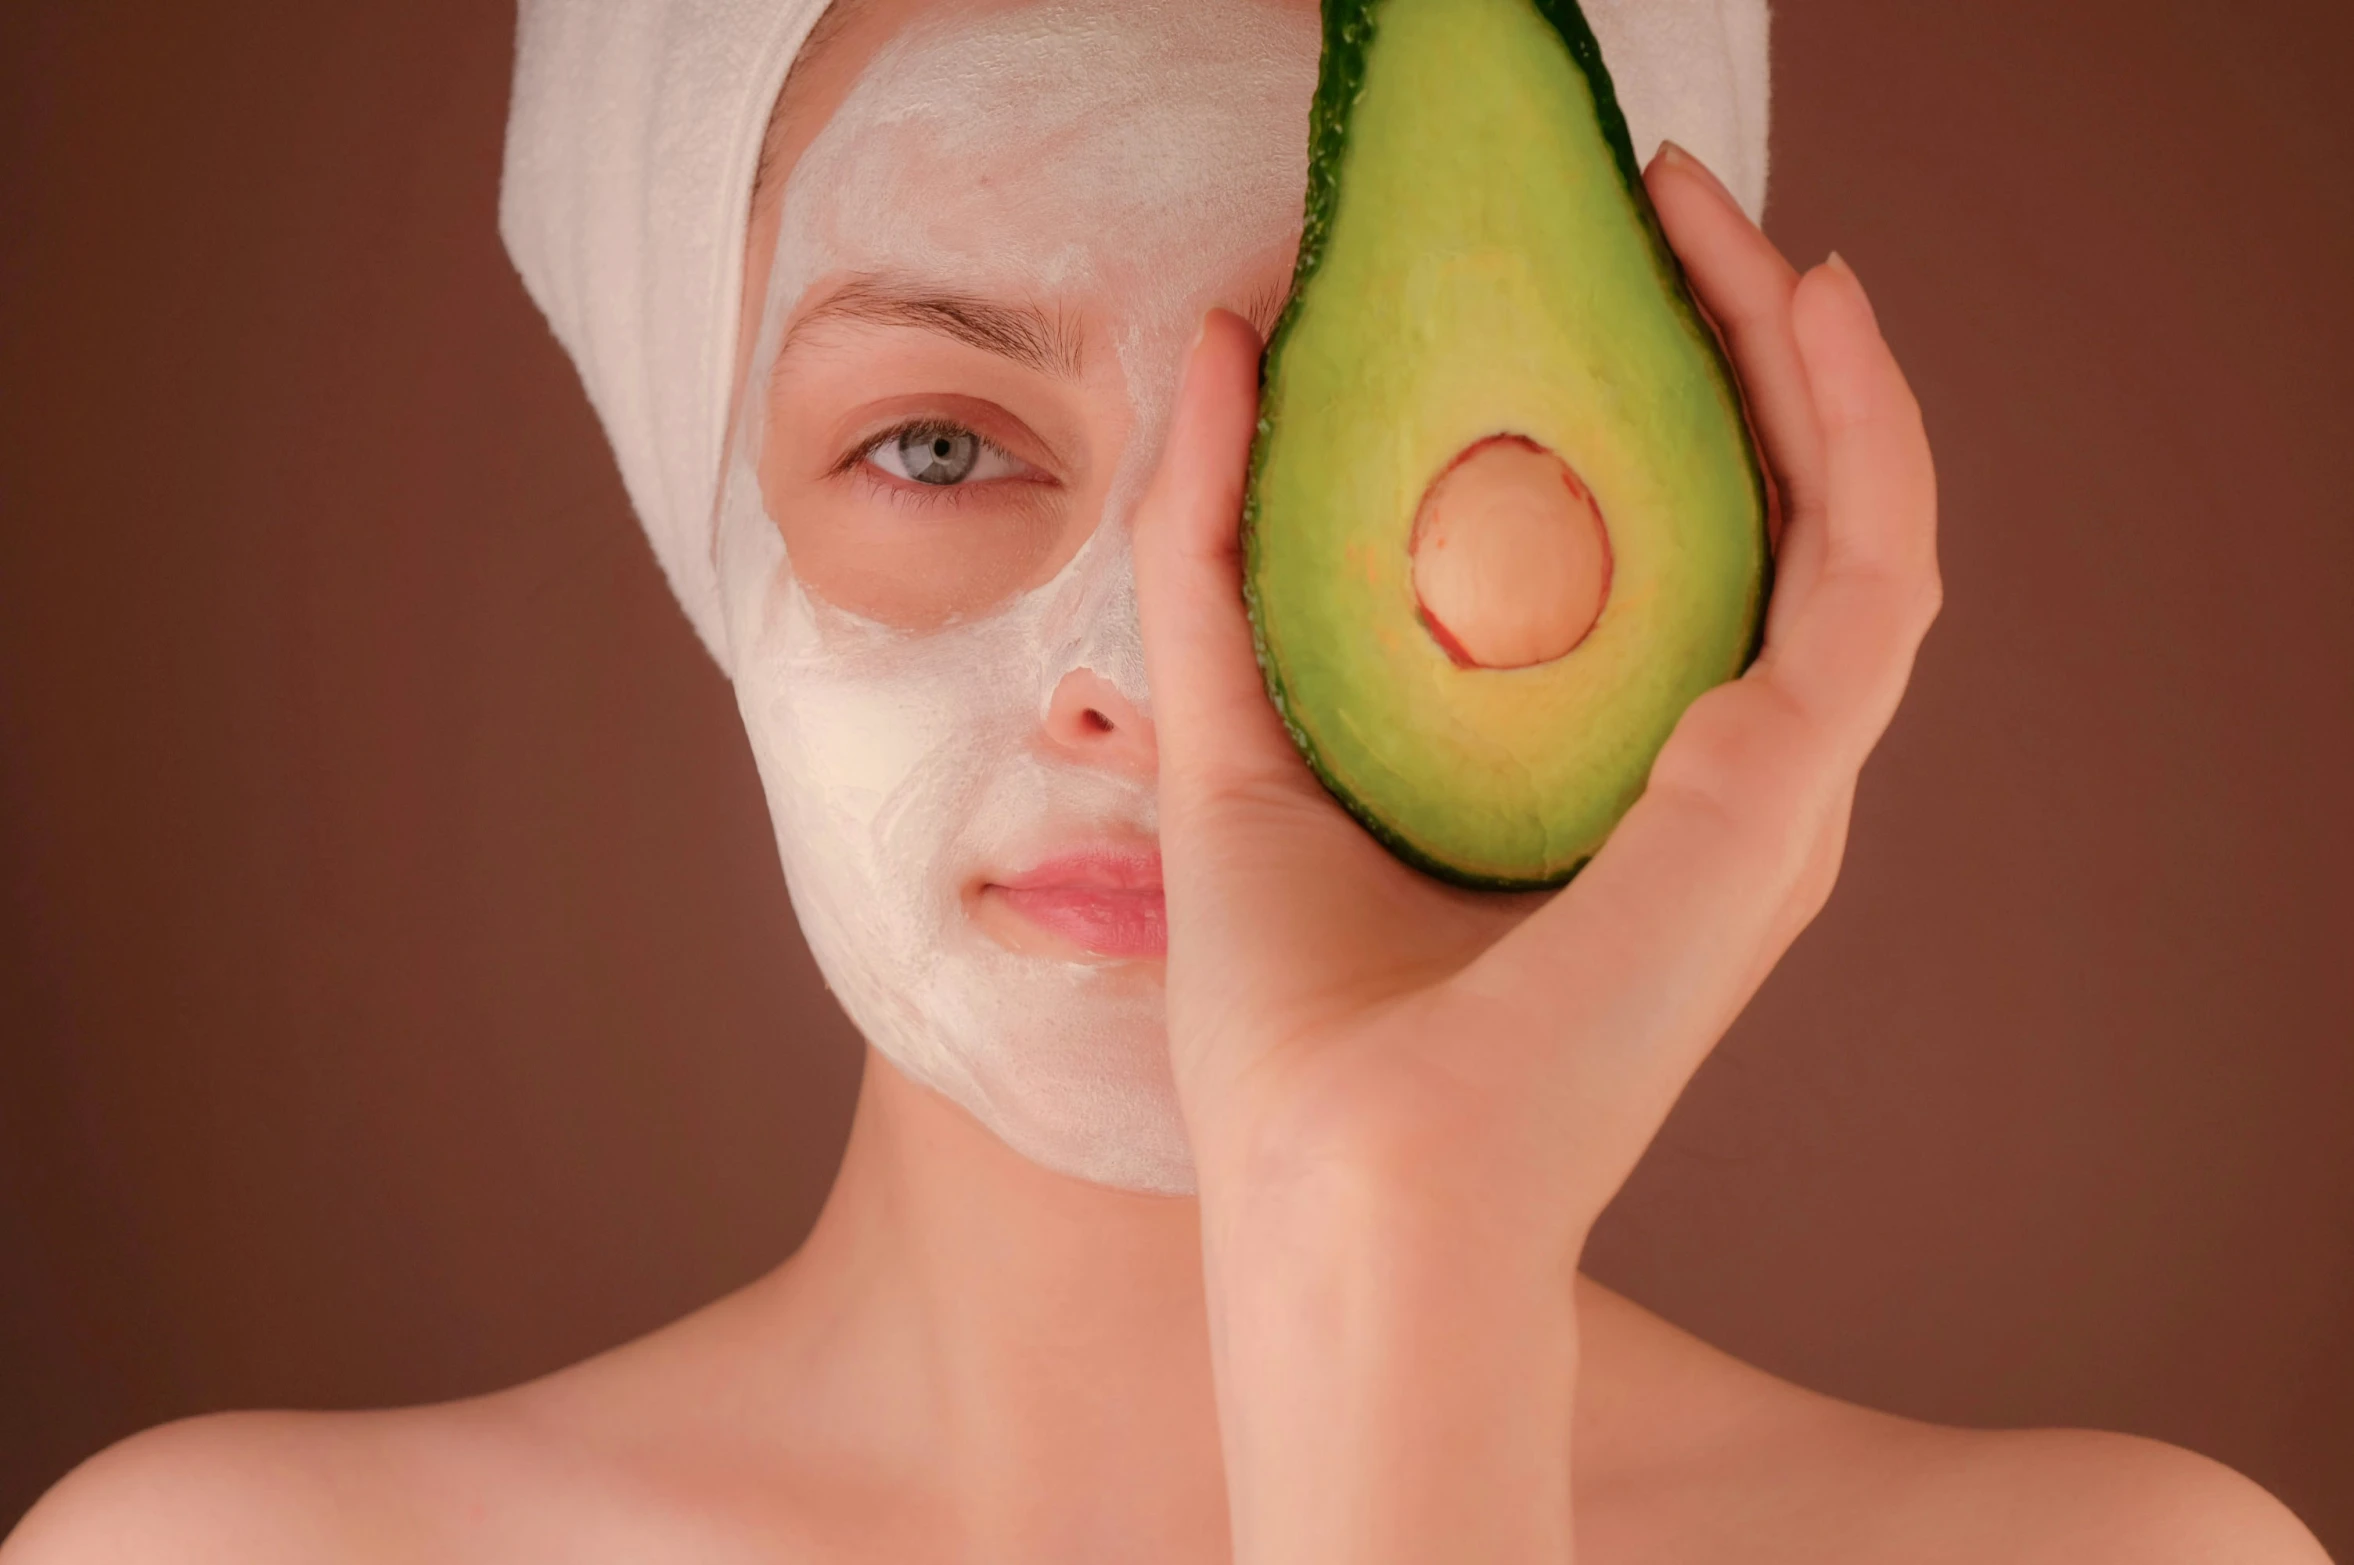 the woman is holding an avocado up to her face